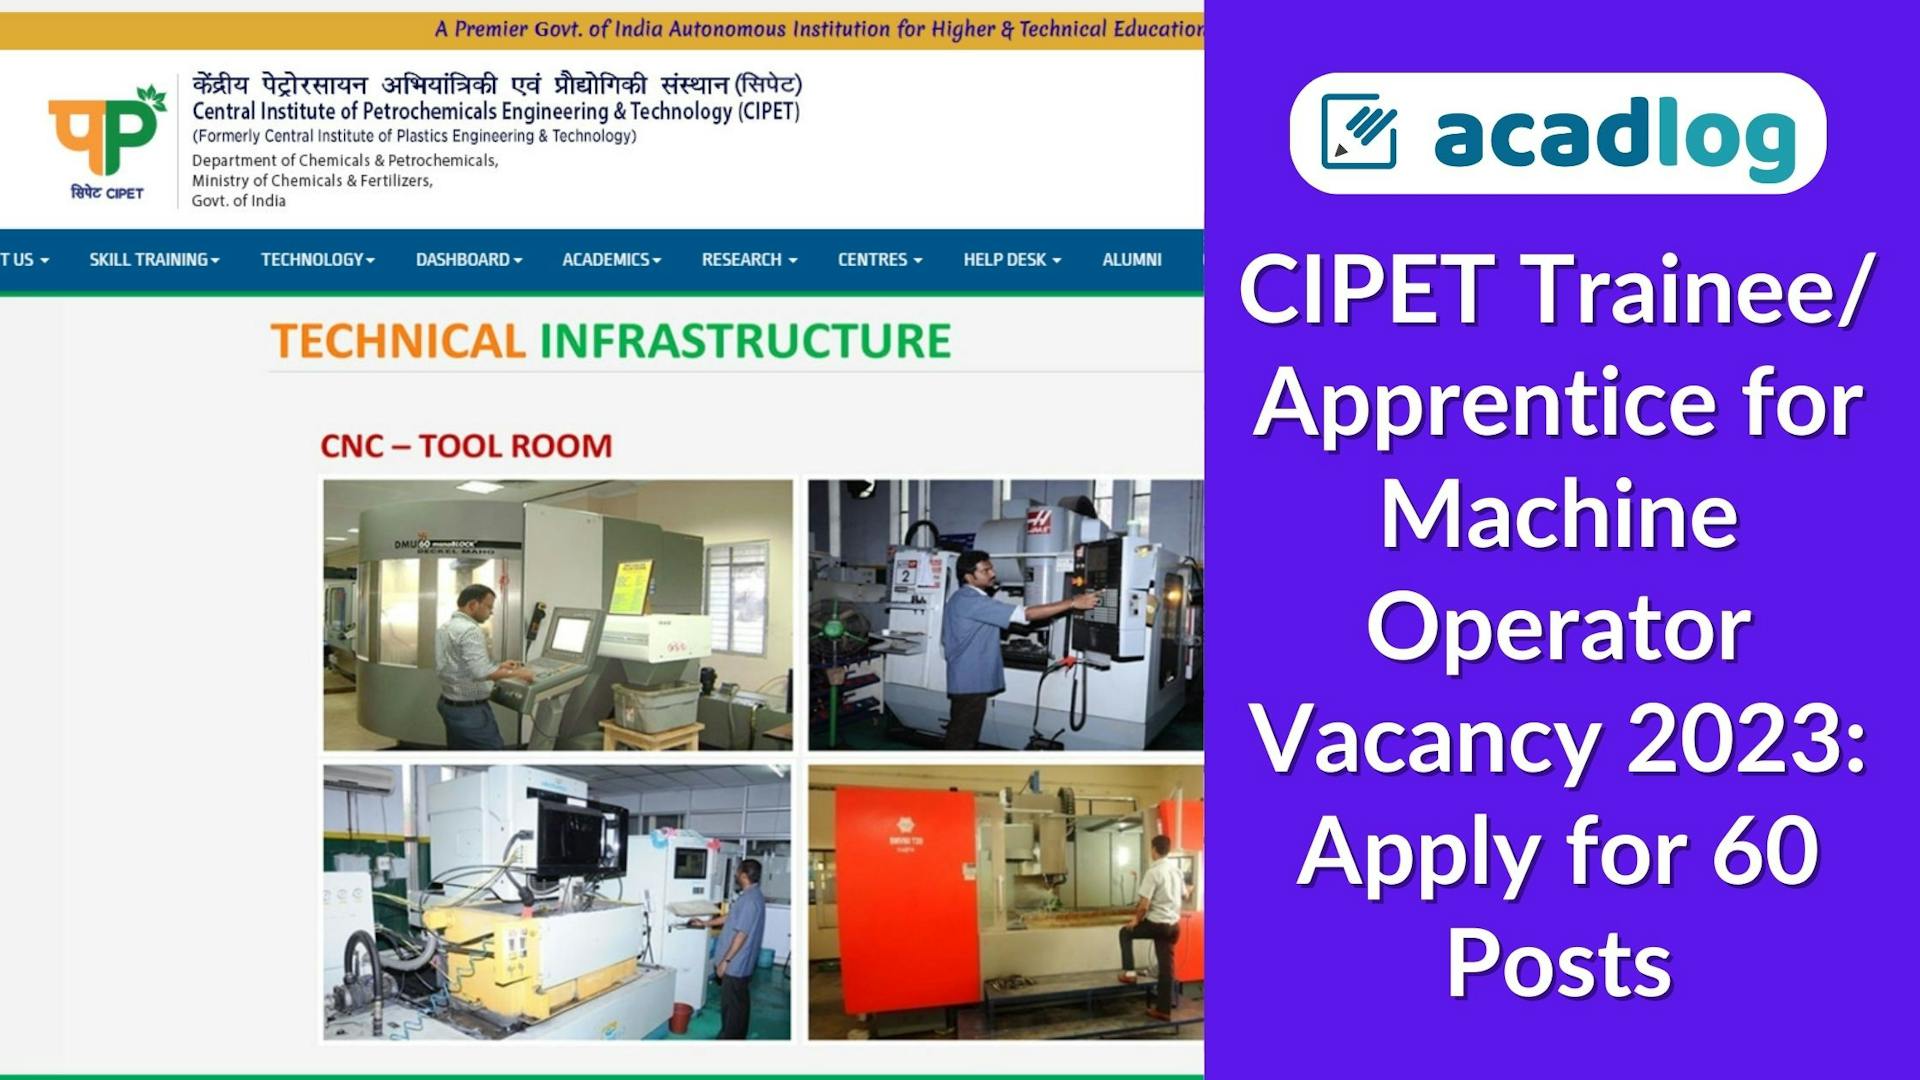 CIPET Trainee/ Apprentice for Machine Operator Vacancy 2023: Apply for 60 Posts